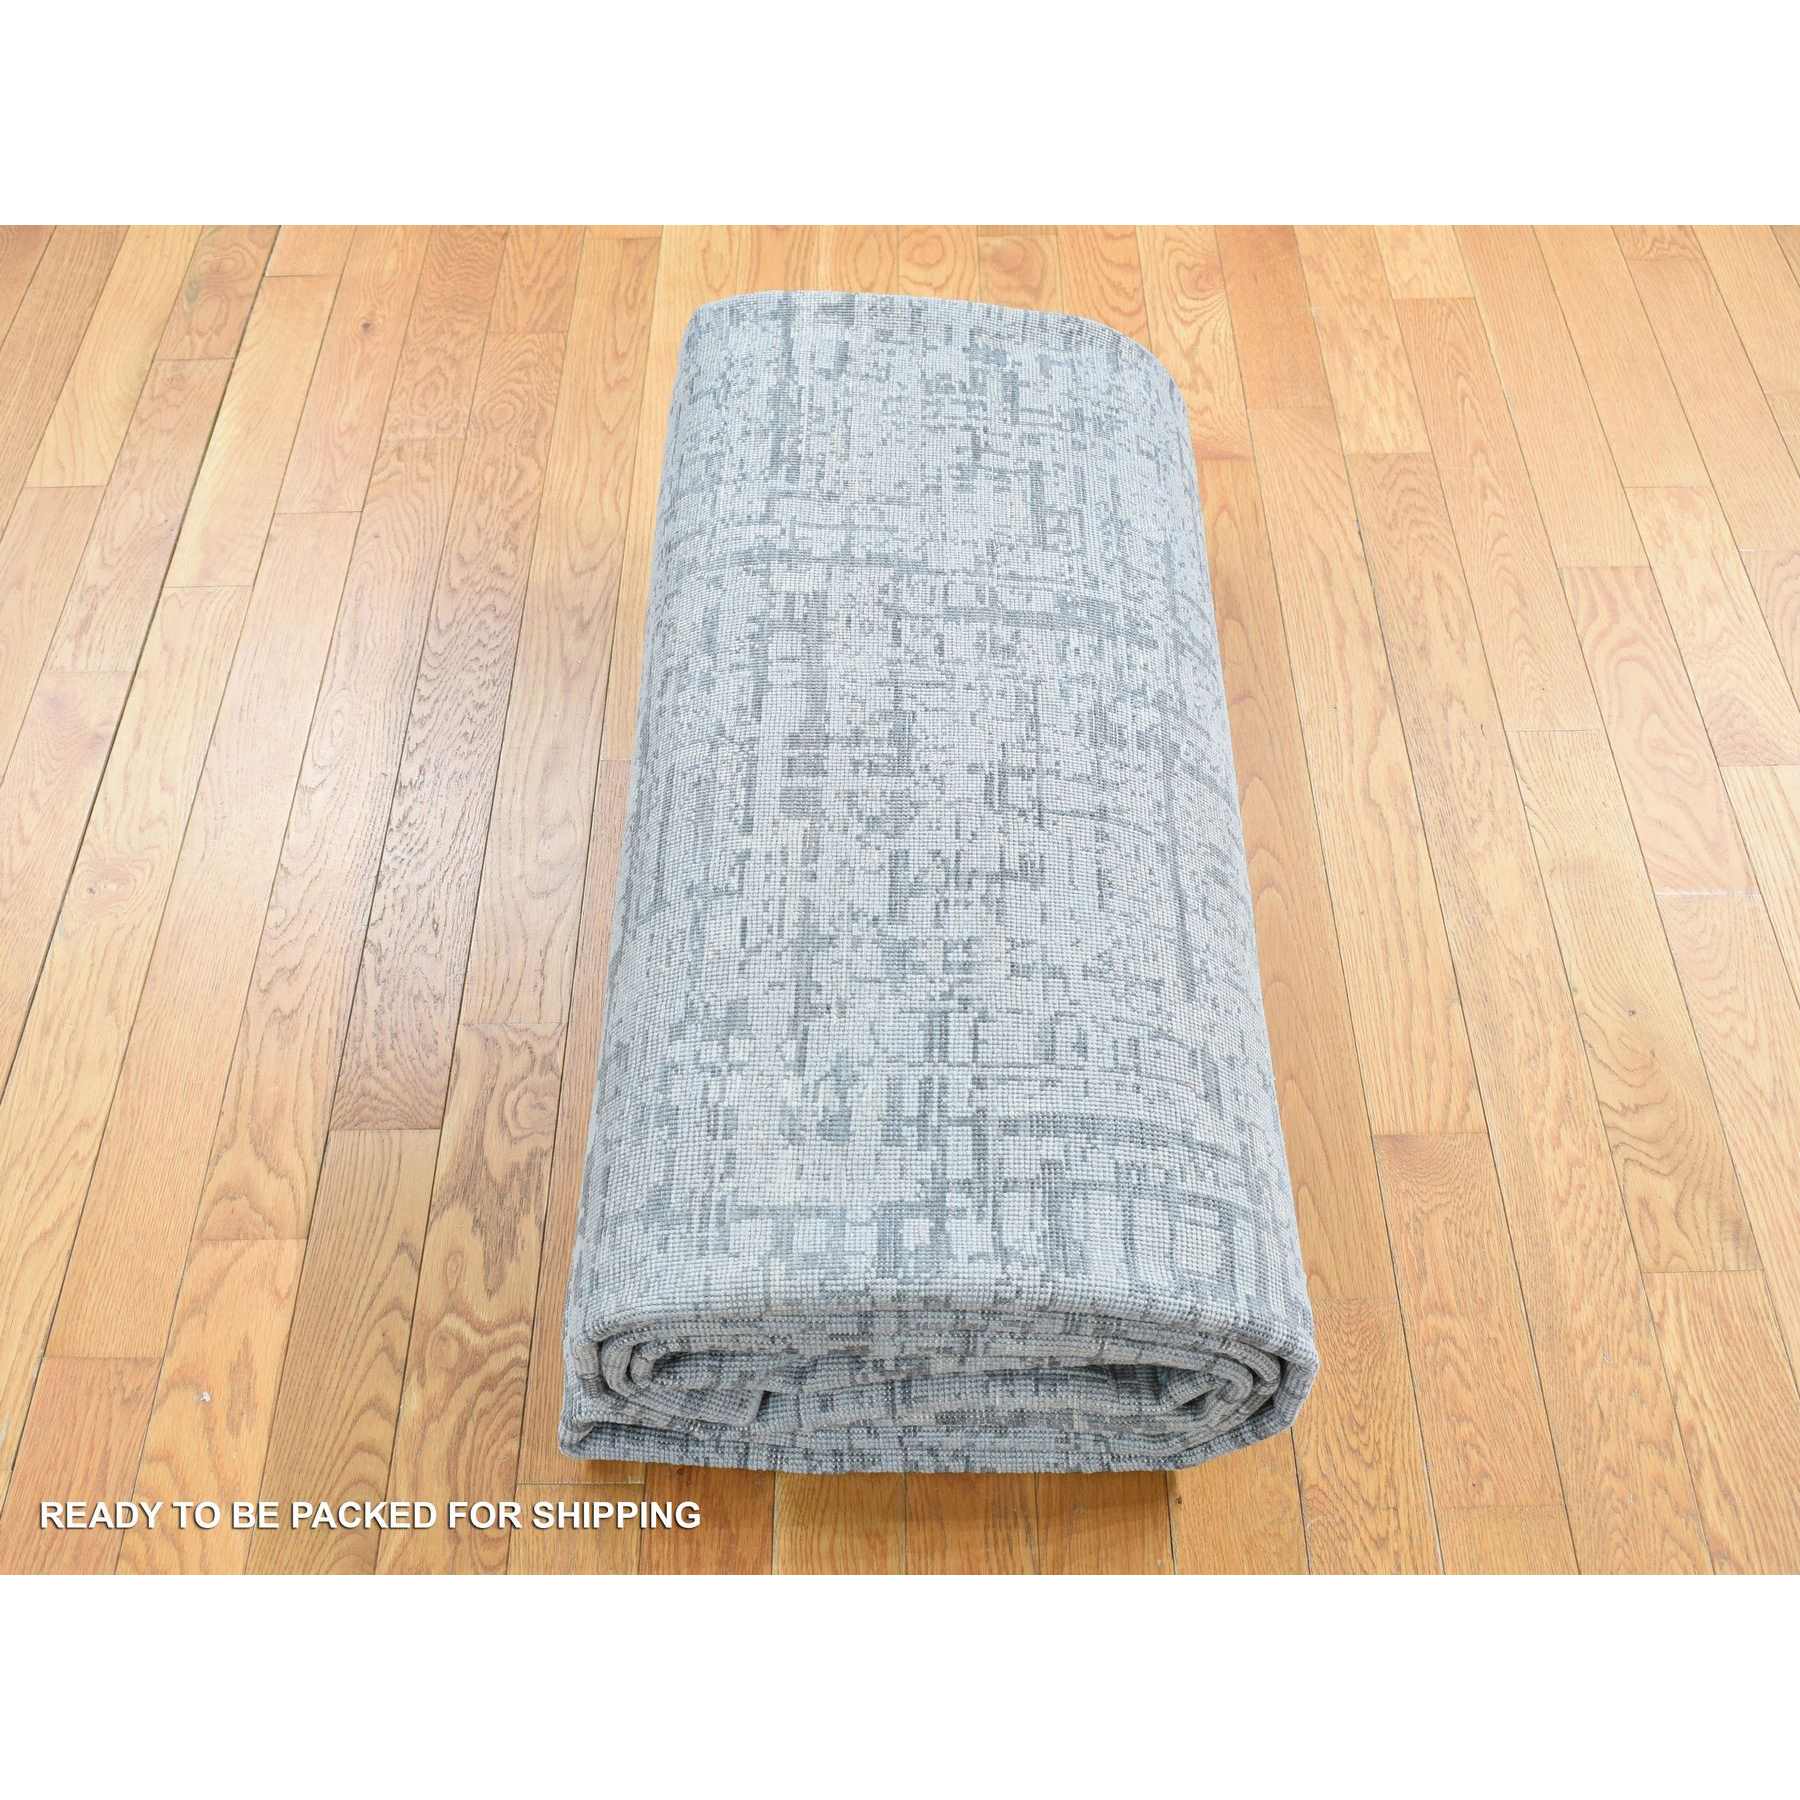 Modern-and-Contemporary-Hand-Knotted-Rug-403650